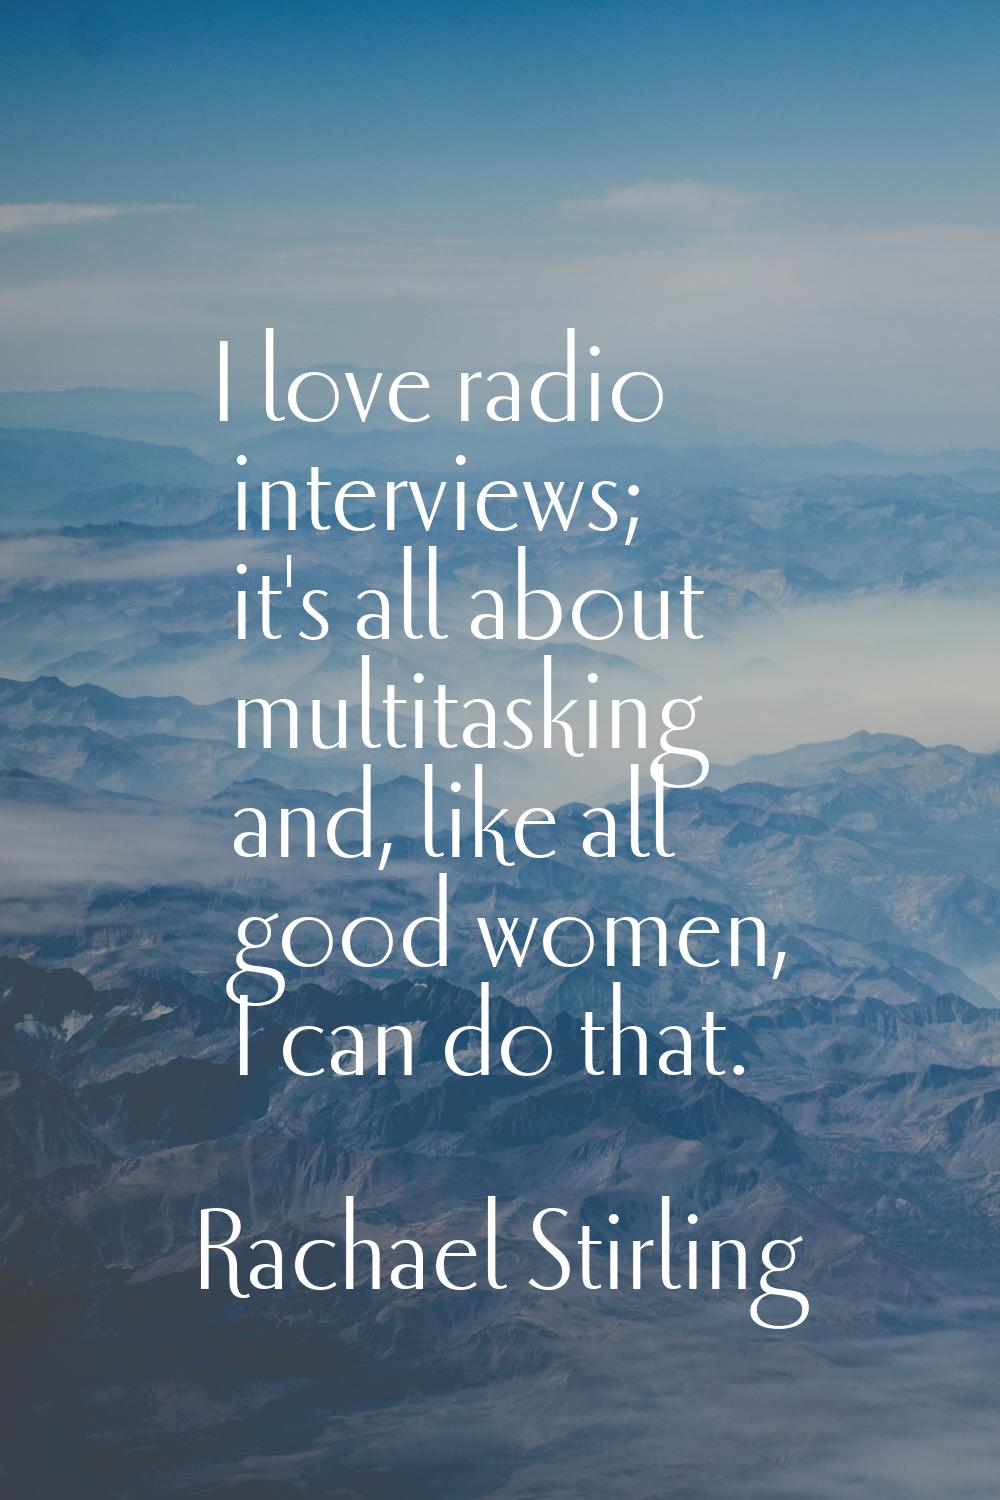 I love radio interviews; it's all about multitasking and, like all good women, I can do that.